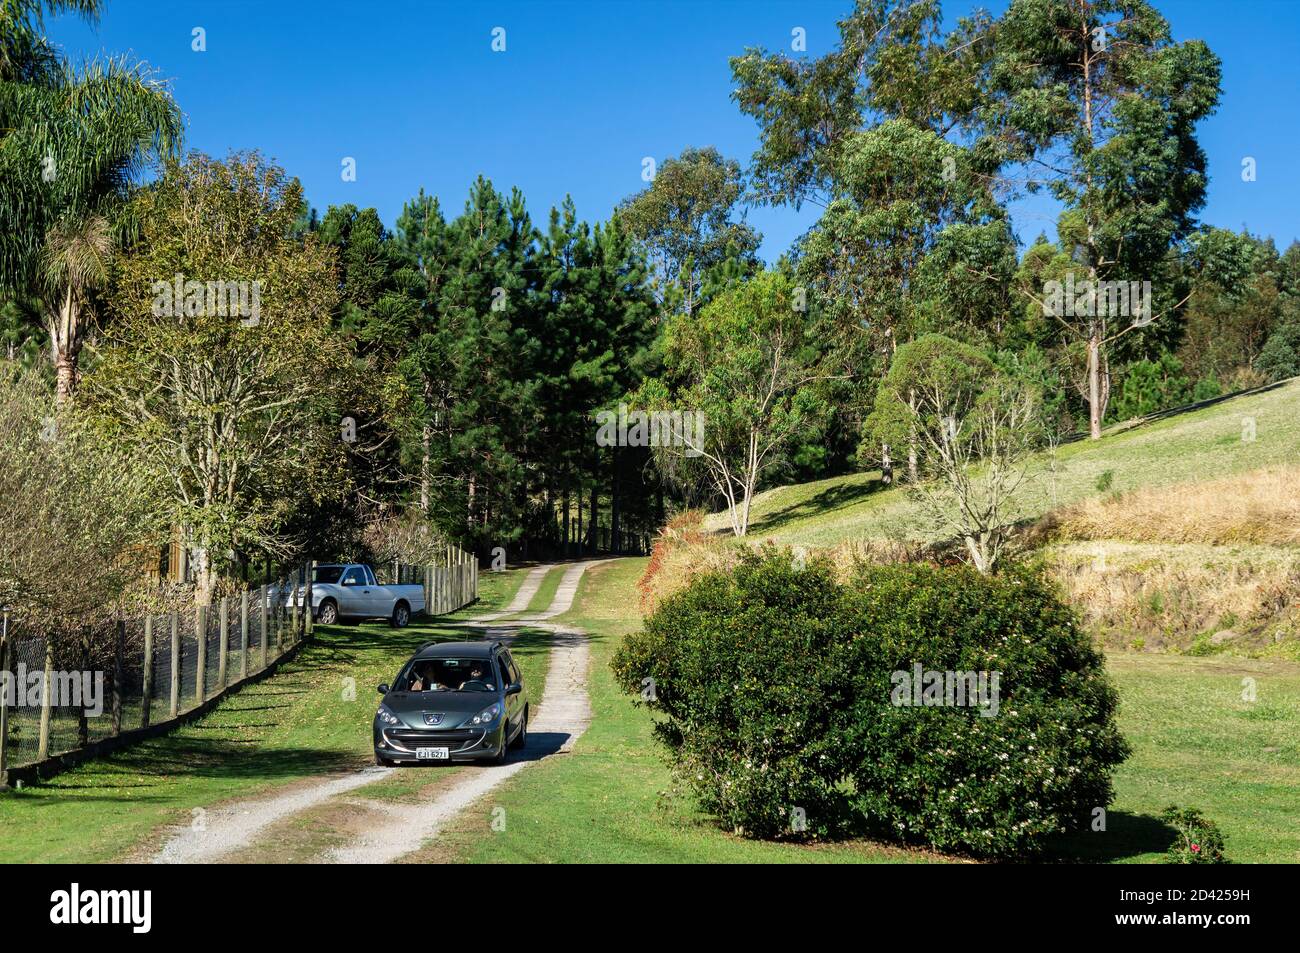 A car arriving at Wolkenburg brewery by the dirt path road surrounded by green vegetation during a sunny day and under clear blue sky. Stock Photo